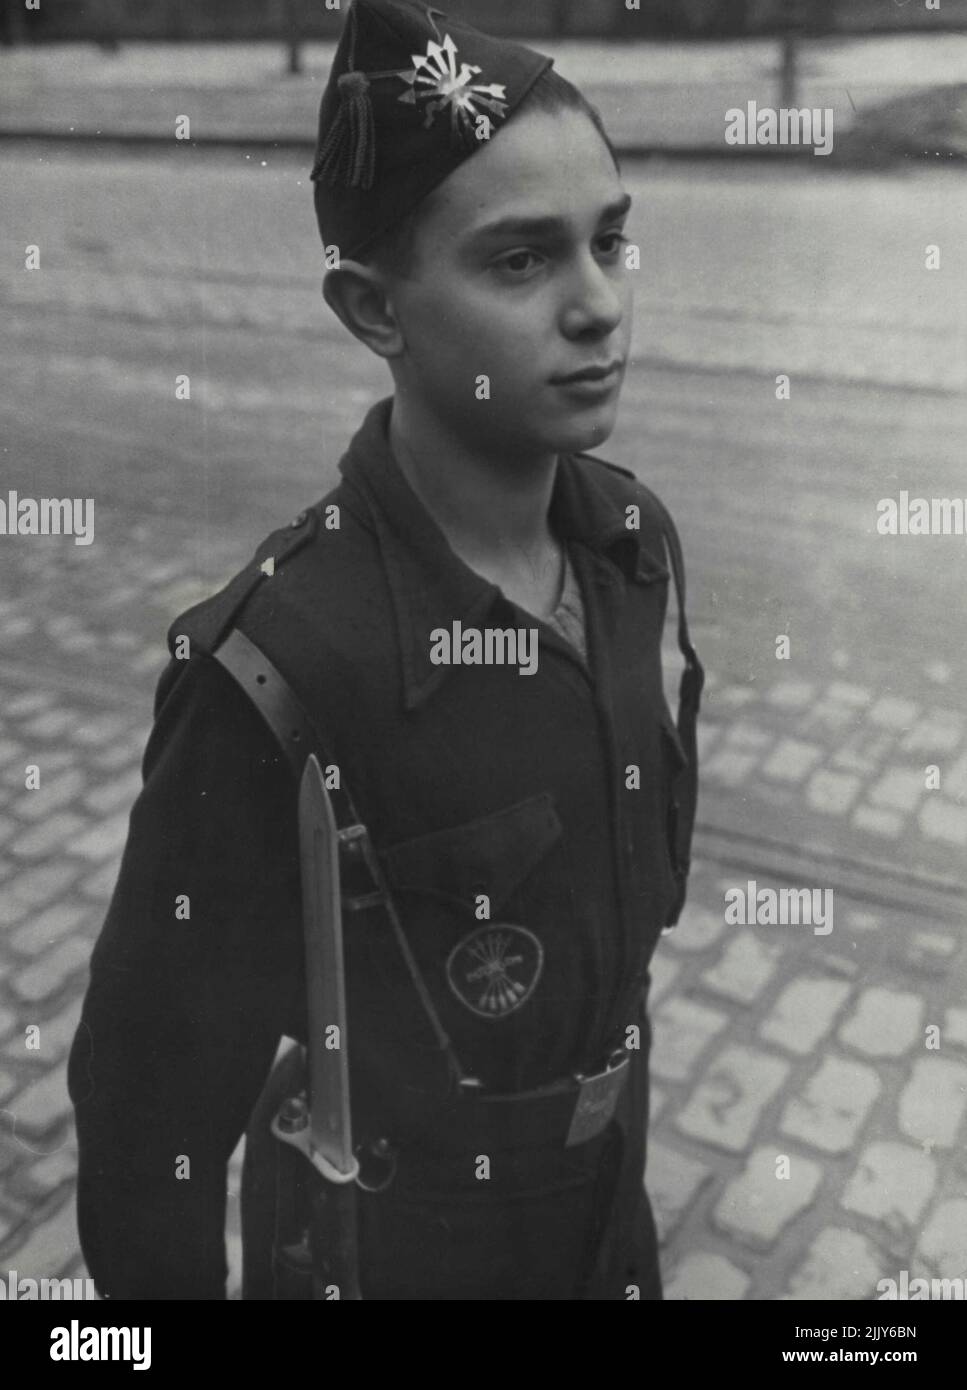 A member of the Falange youth. Like the Ballila in Italy they carry dummy rifles. August 29, 1951. (Photo by Black Star). Stock Photo